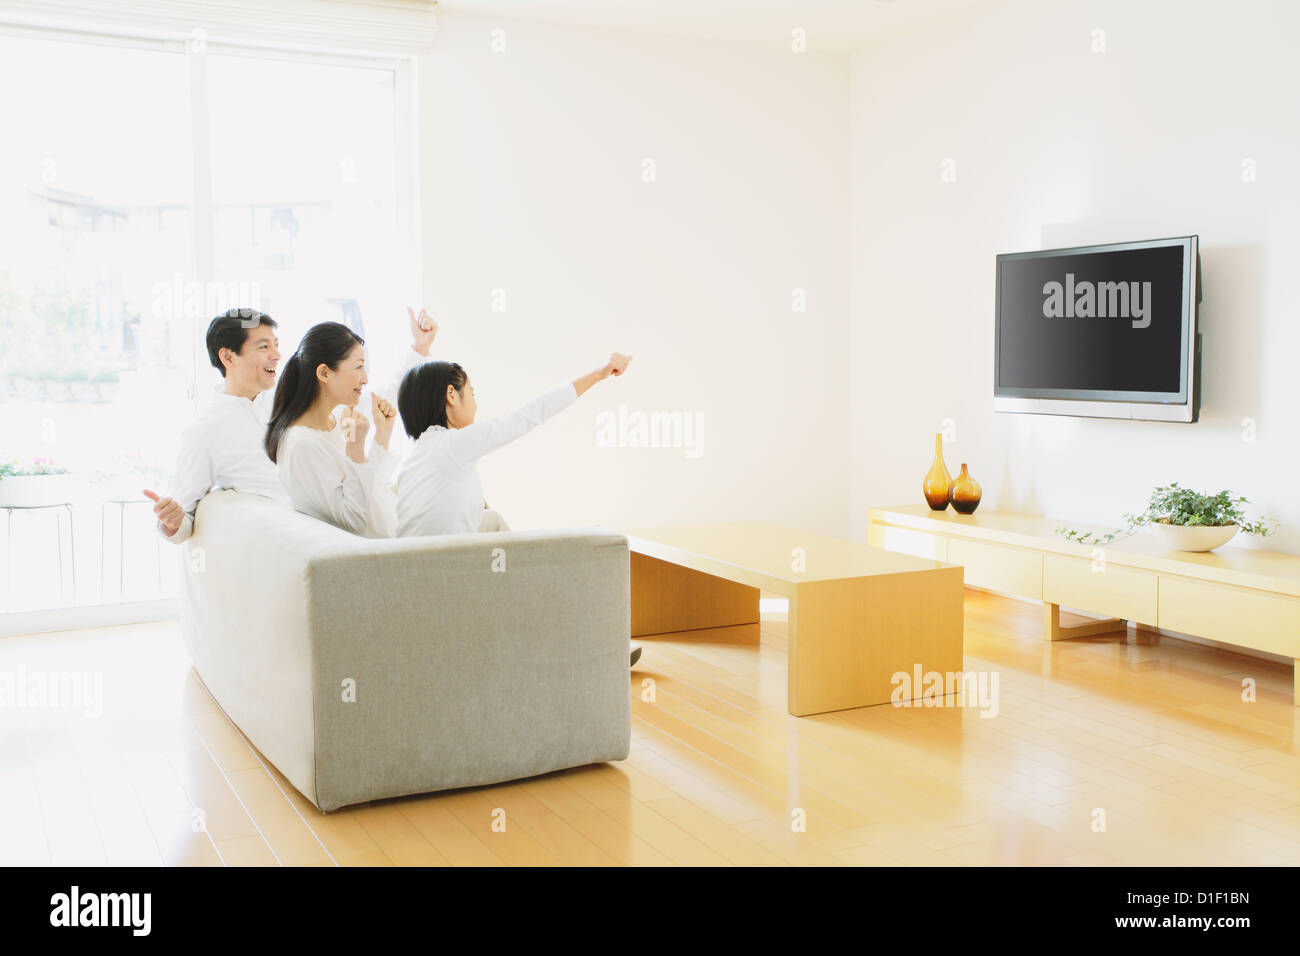 Family of three people watching TV on the sofa in the living room Stock Photo